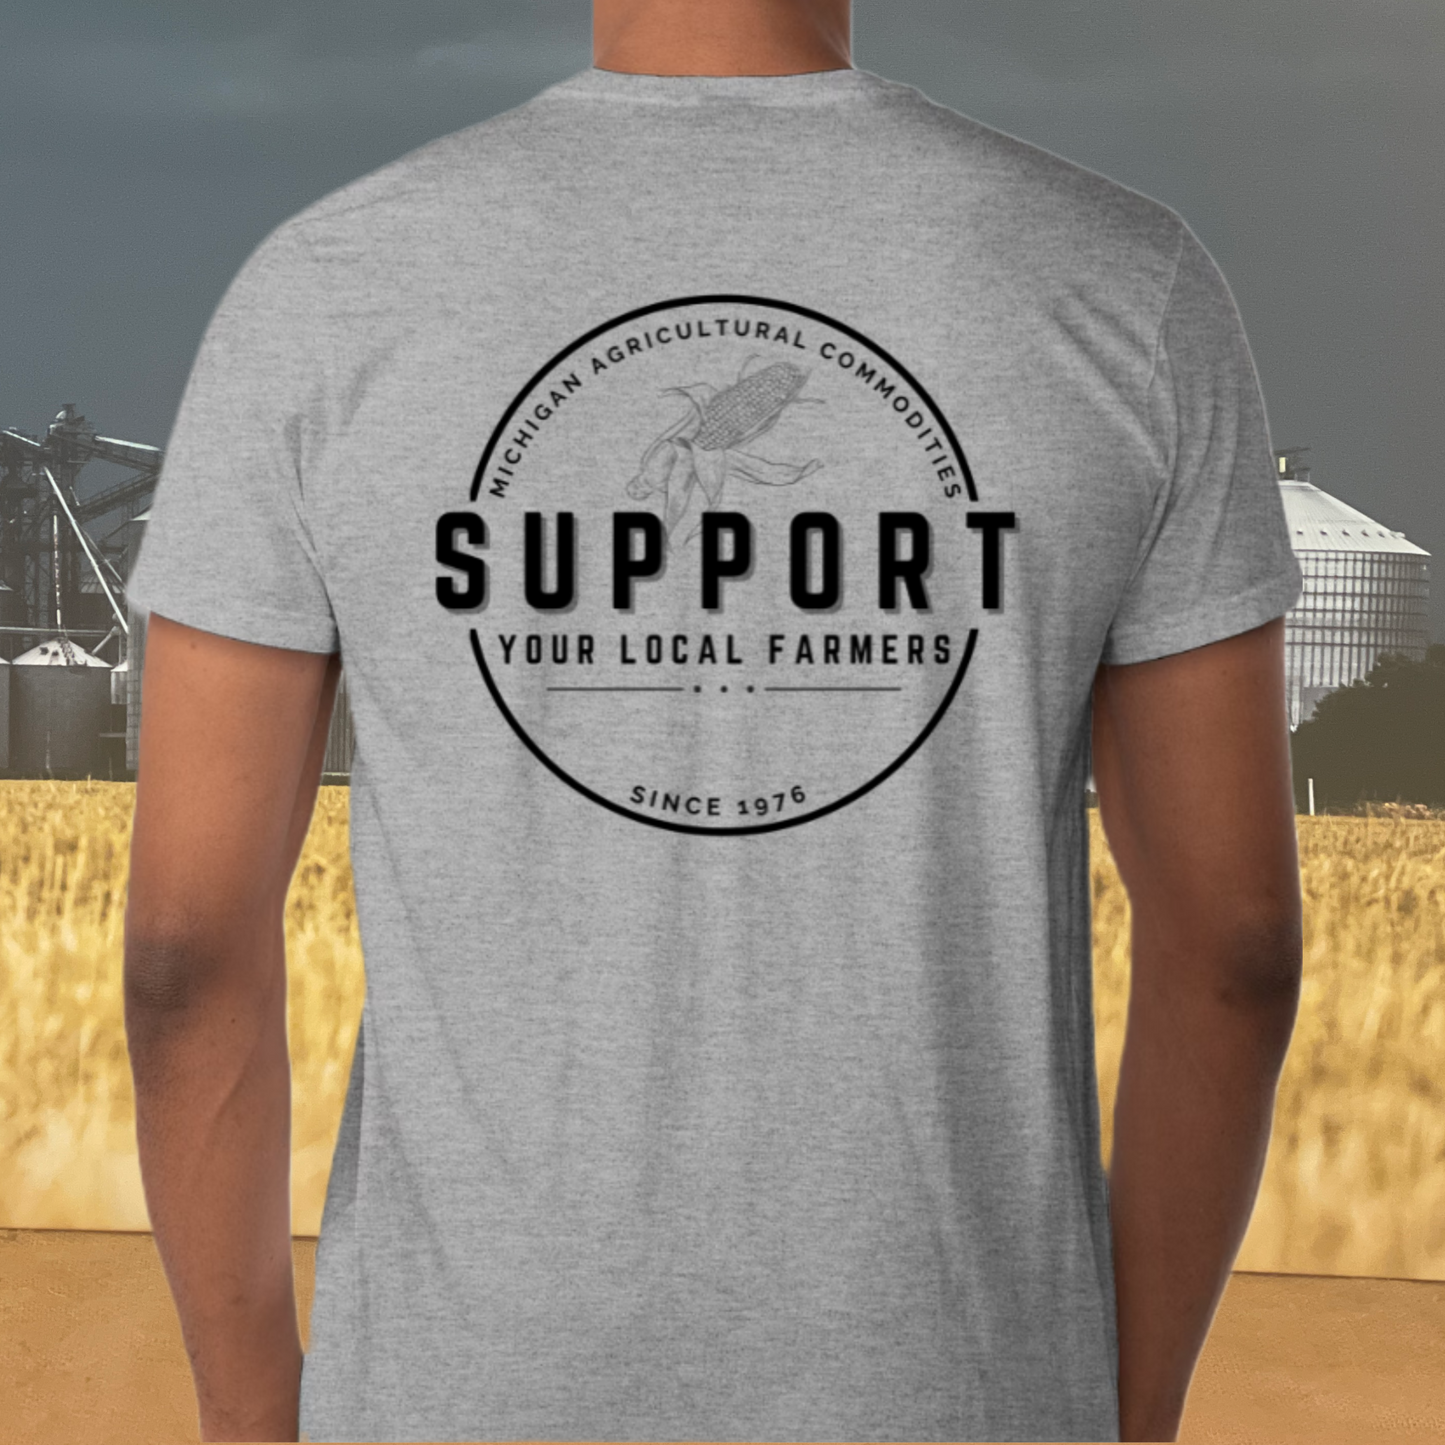 M.A.C. Support Your Local Farmers T-Shirt - GRAY